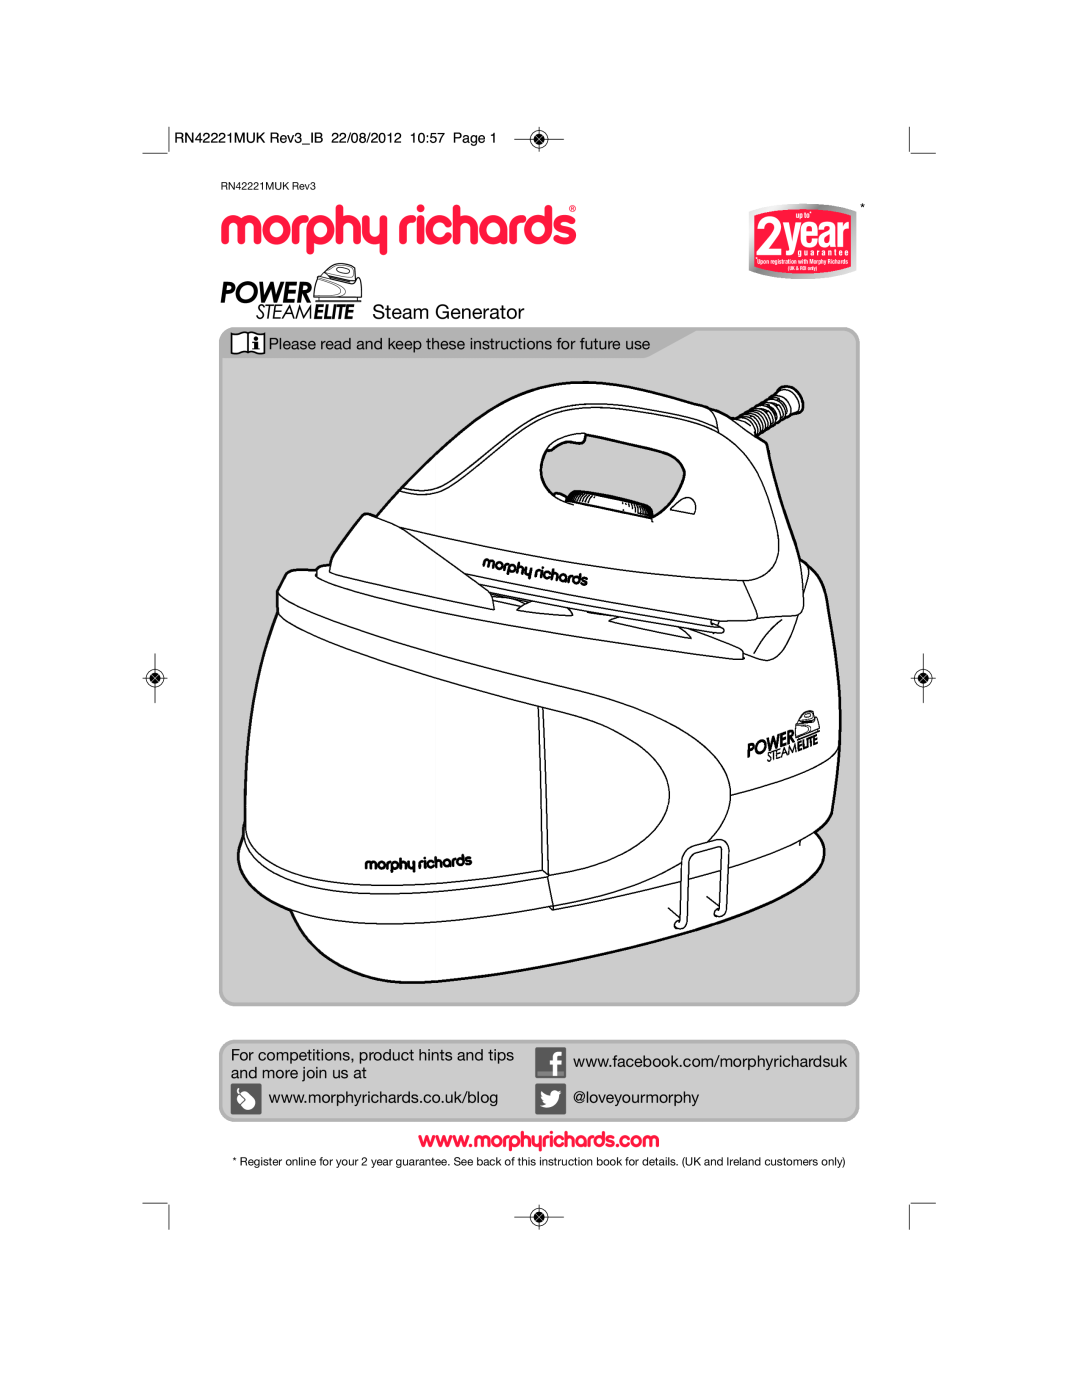 Morphy Richards RN42221MUK Rev3 manual Steam Generator, Please read and keep these instructions for future use 